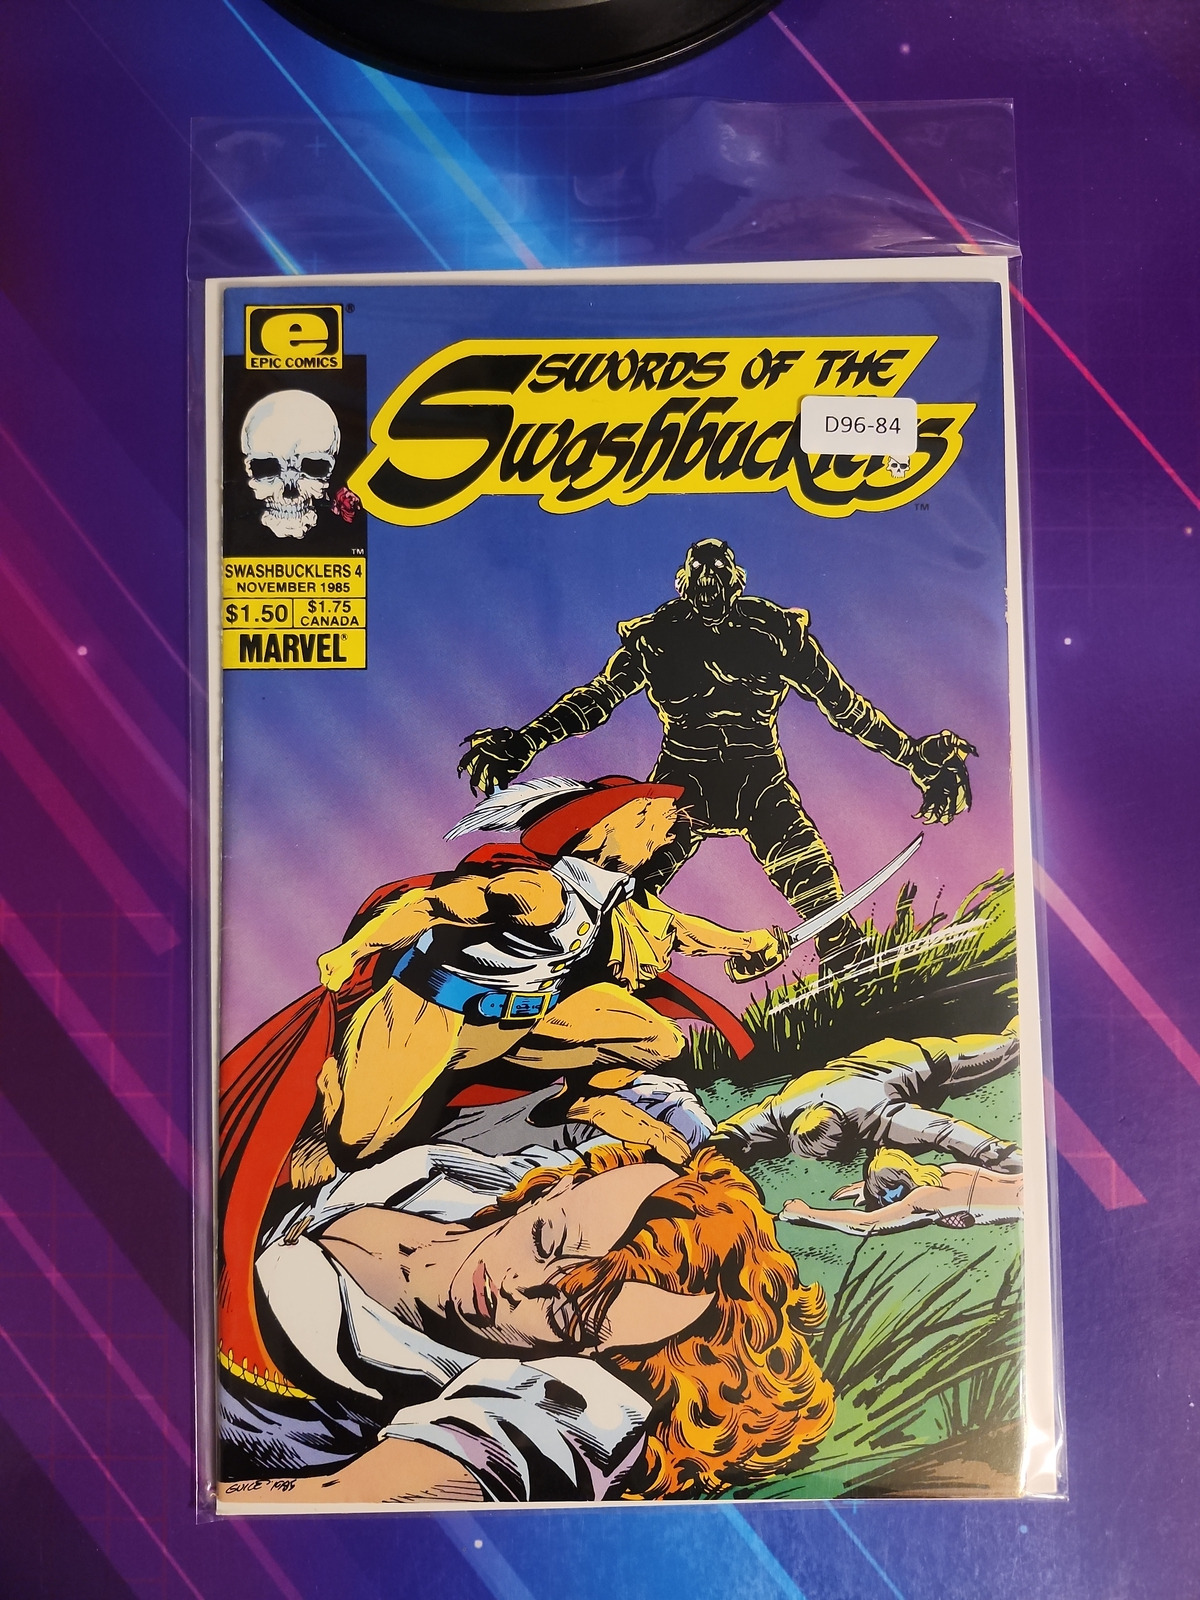 SWORDS OF THE SWASHBUCKLERS #4 8.0 EPIC COMIC BOOK D96-84